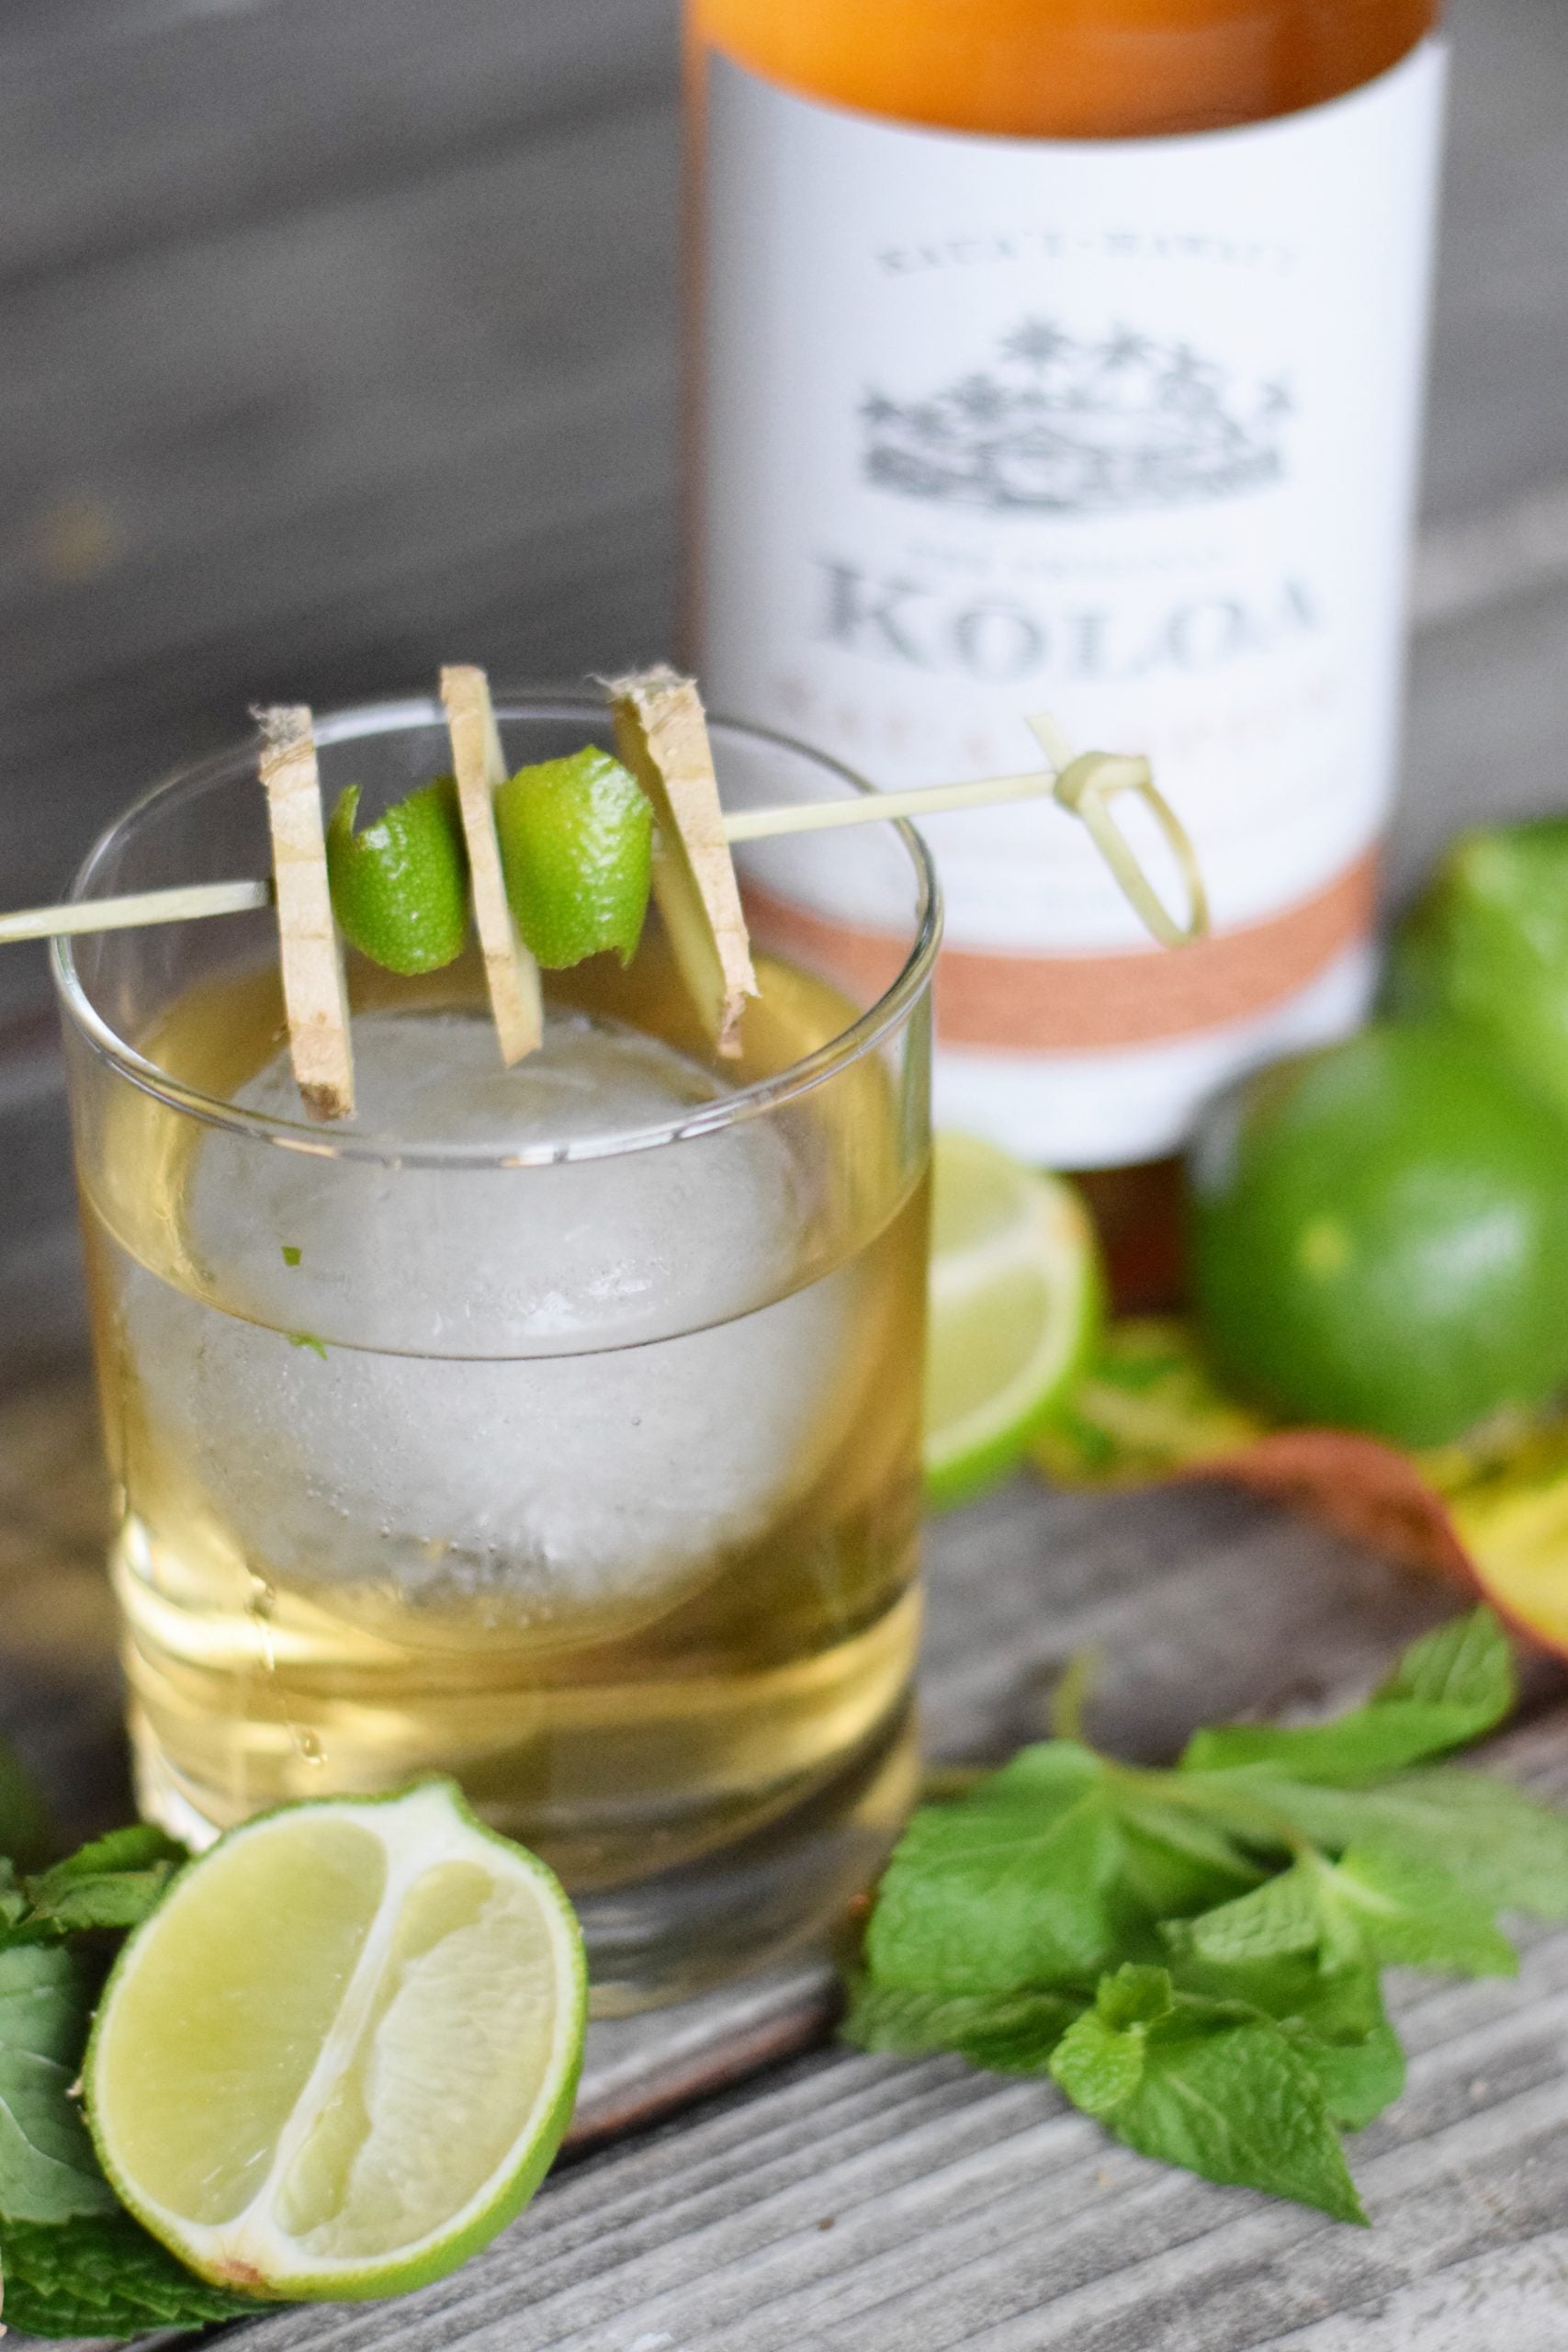 Spicy Ginger Mule Cocktail With Kōloa Rum — A refreshing twist on a classic Moscow Mule featuring Kōloa Spiced Rum, local ginger beer and infused with hints of mint and lime! | Moscow Mule Recipe - Ginger Beer Cocktail Recipes - Ginger Beer Cocktail - Cocktail with Kōloa Rum - Ginger Mule recipe 